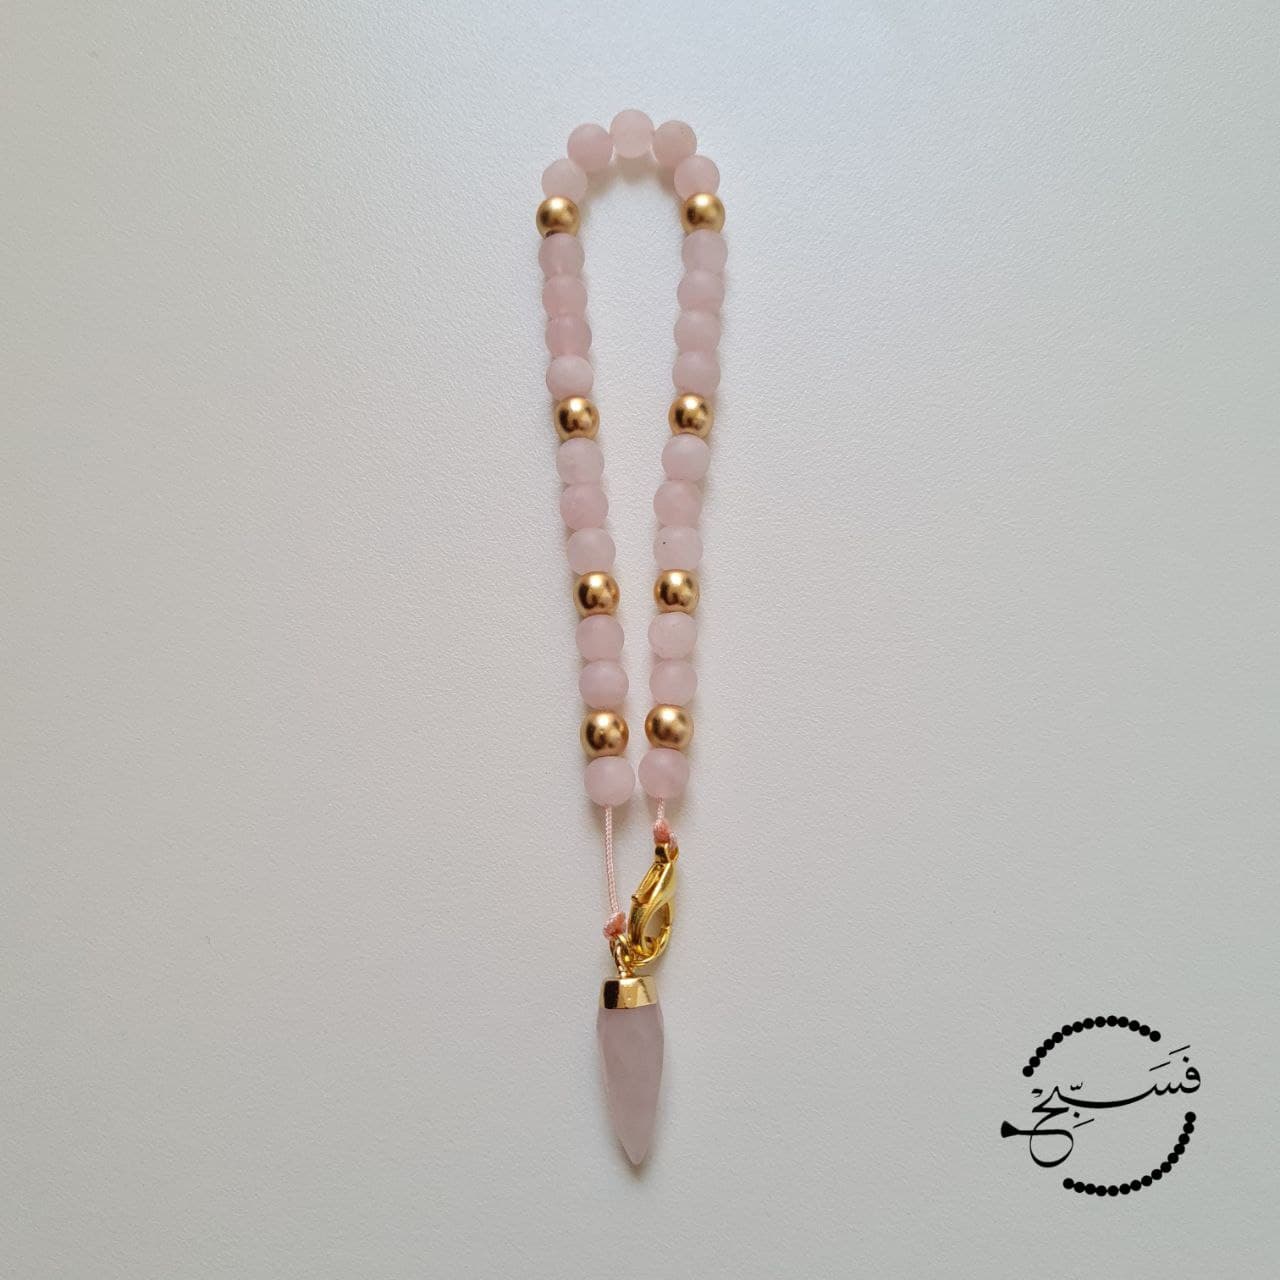 Rose quartz bag charm for dhikr on the go!   33 bead tasbih that can be attached to your bag.   Packaged in a luxurious pouch and a gift box.